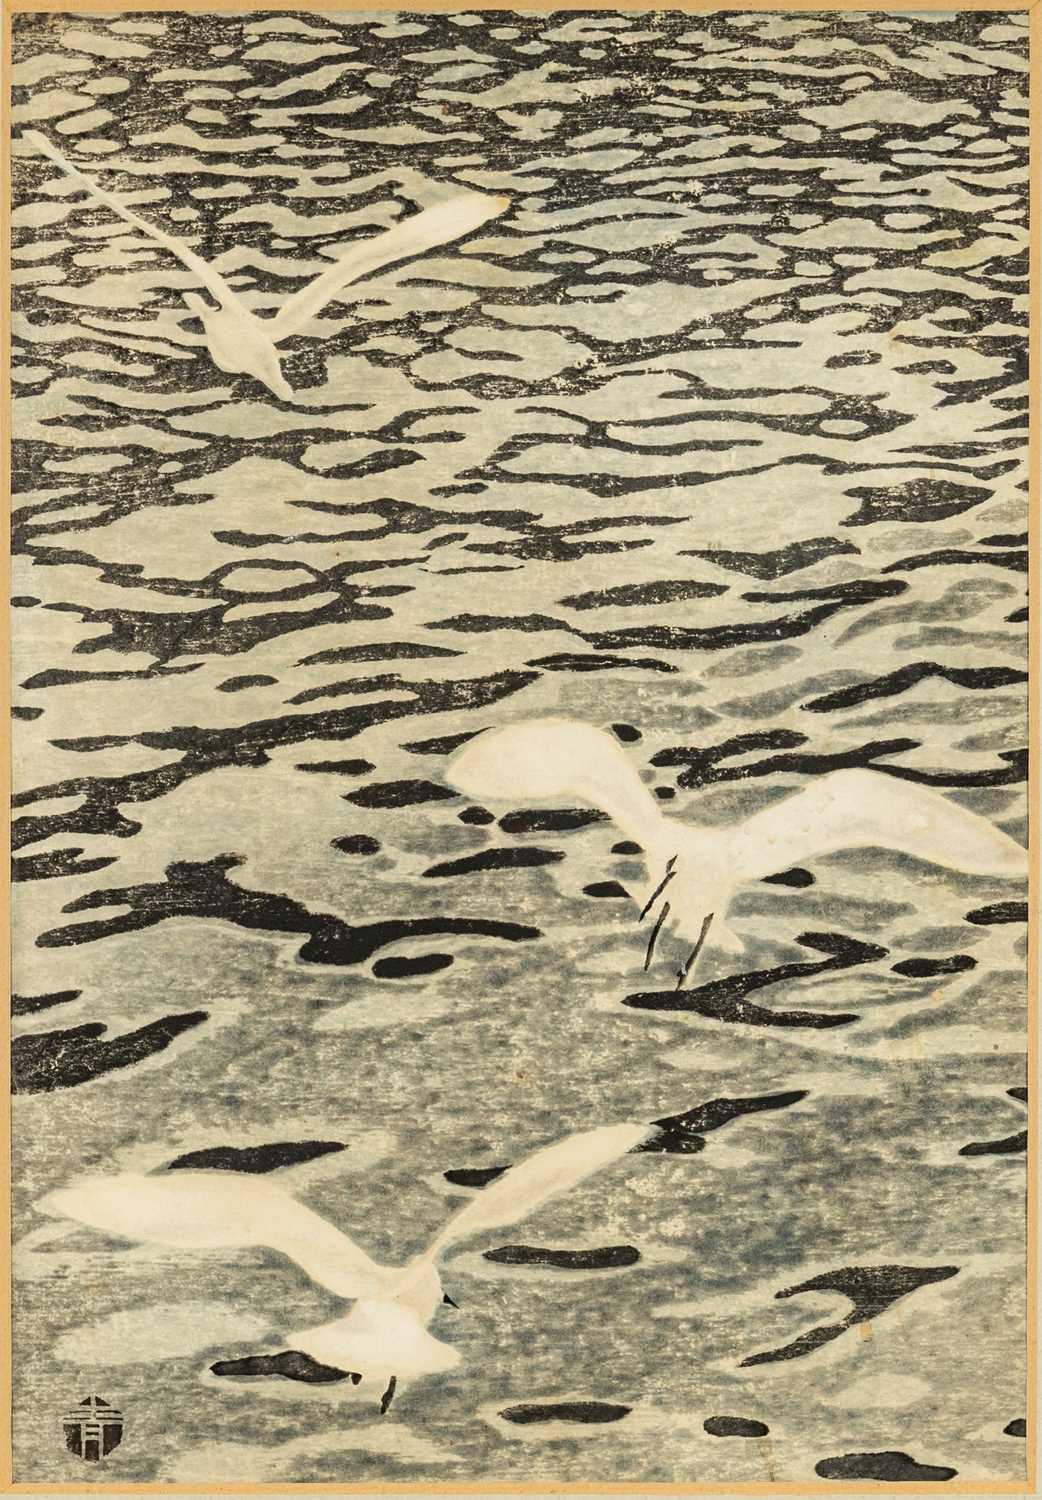 MASAHARU AOYAMA (Japanese, 1893-1969) woodblock prints -'Seagulls' and 'Trees in Snow', signed - Image 3 of 3